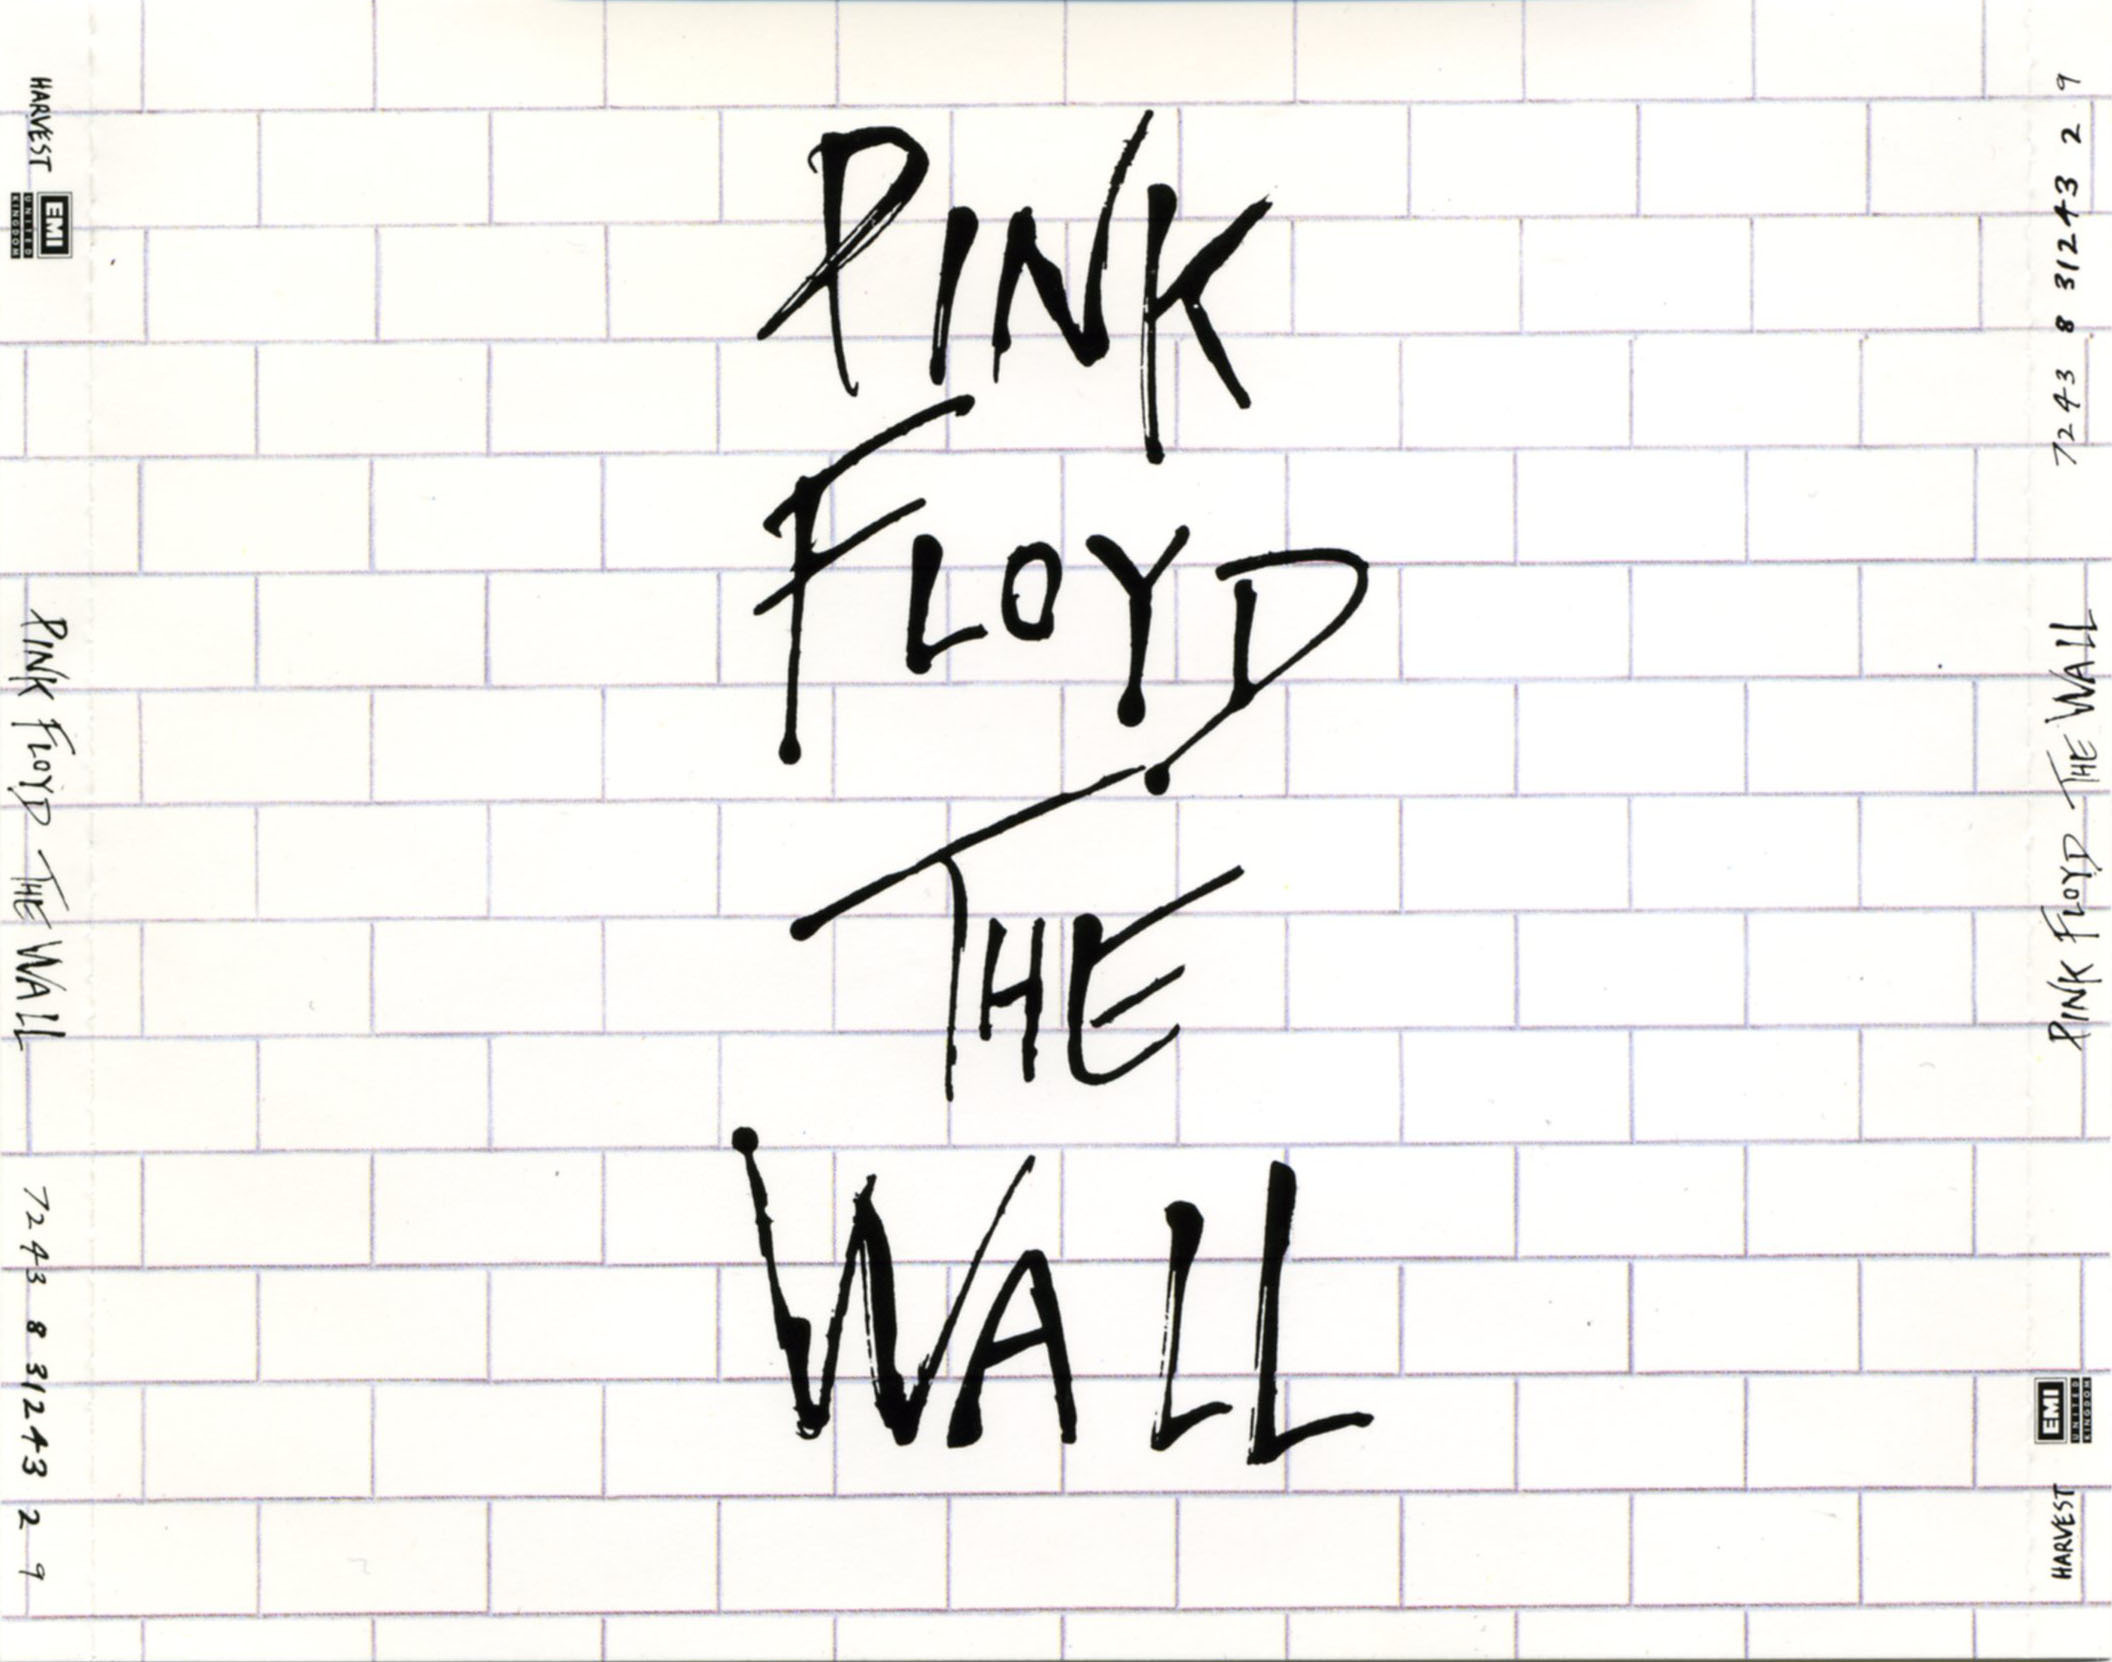 The Wall Album cover